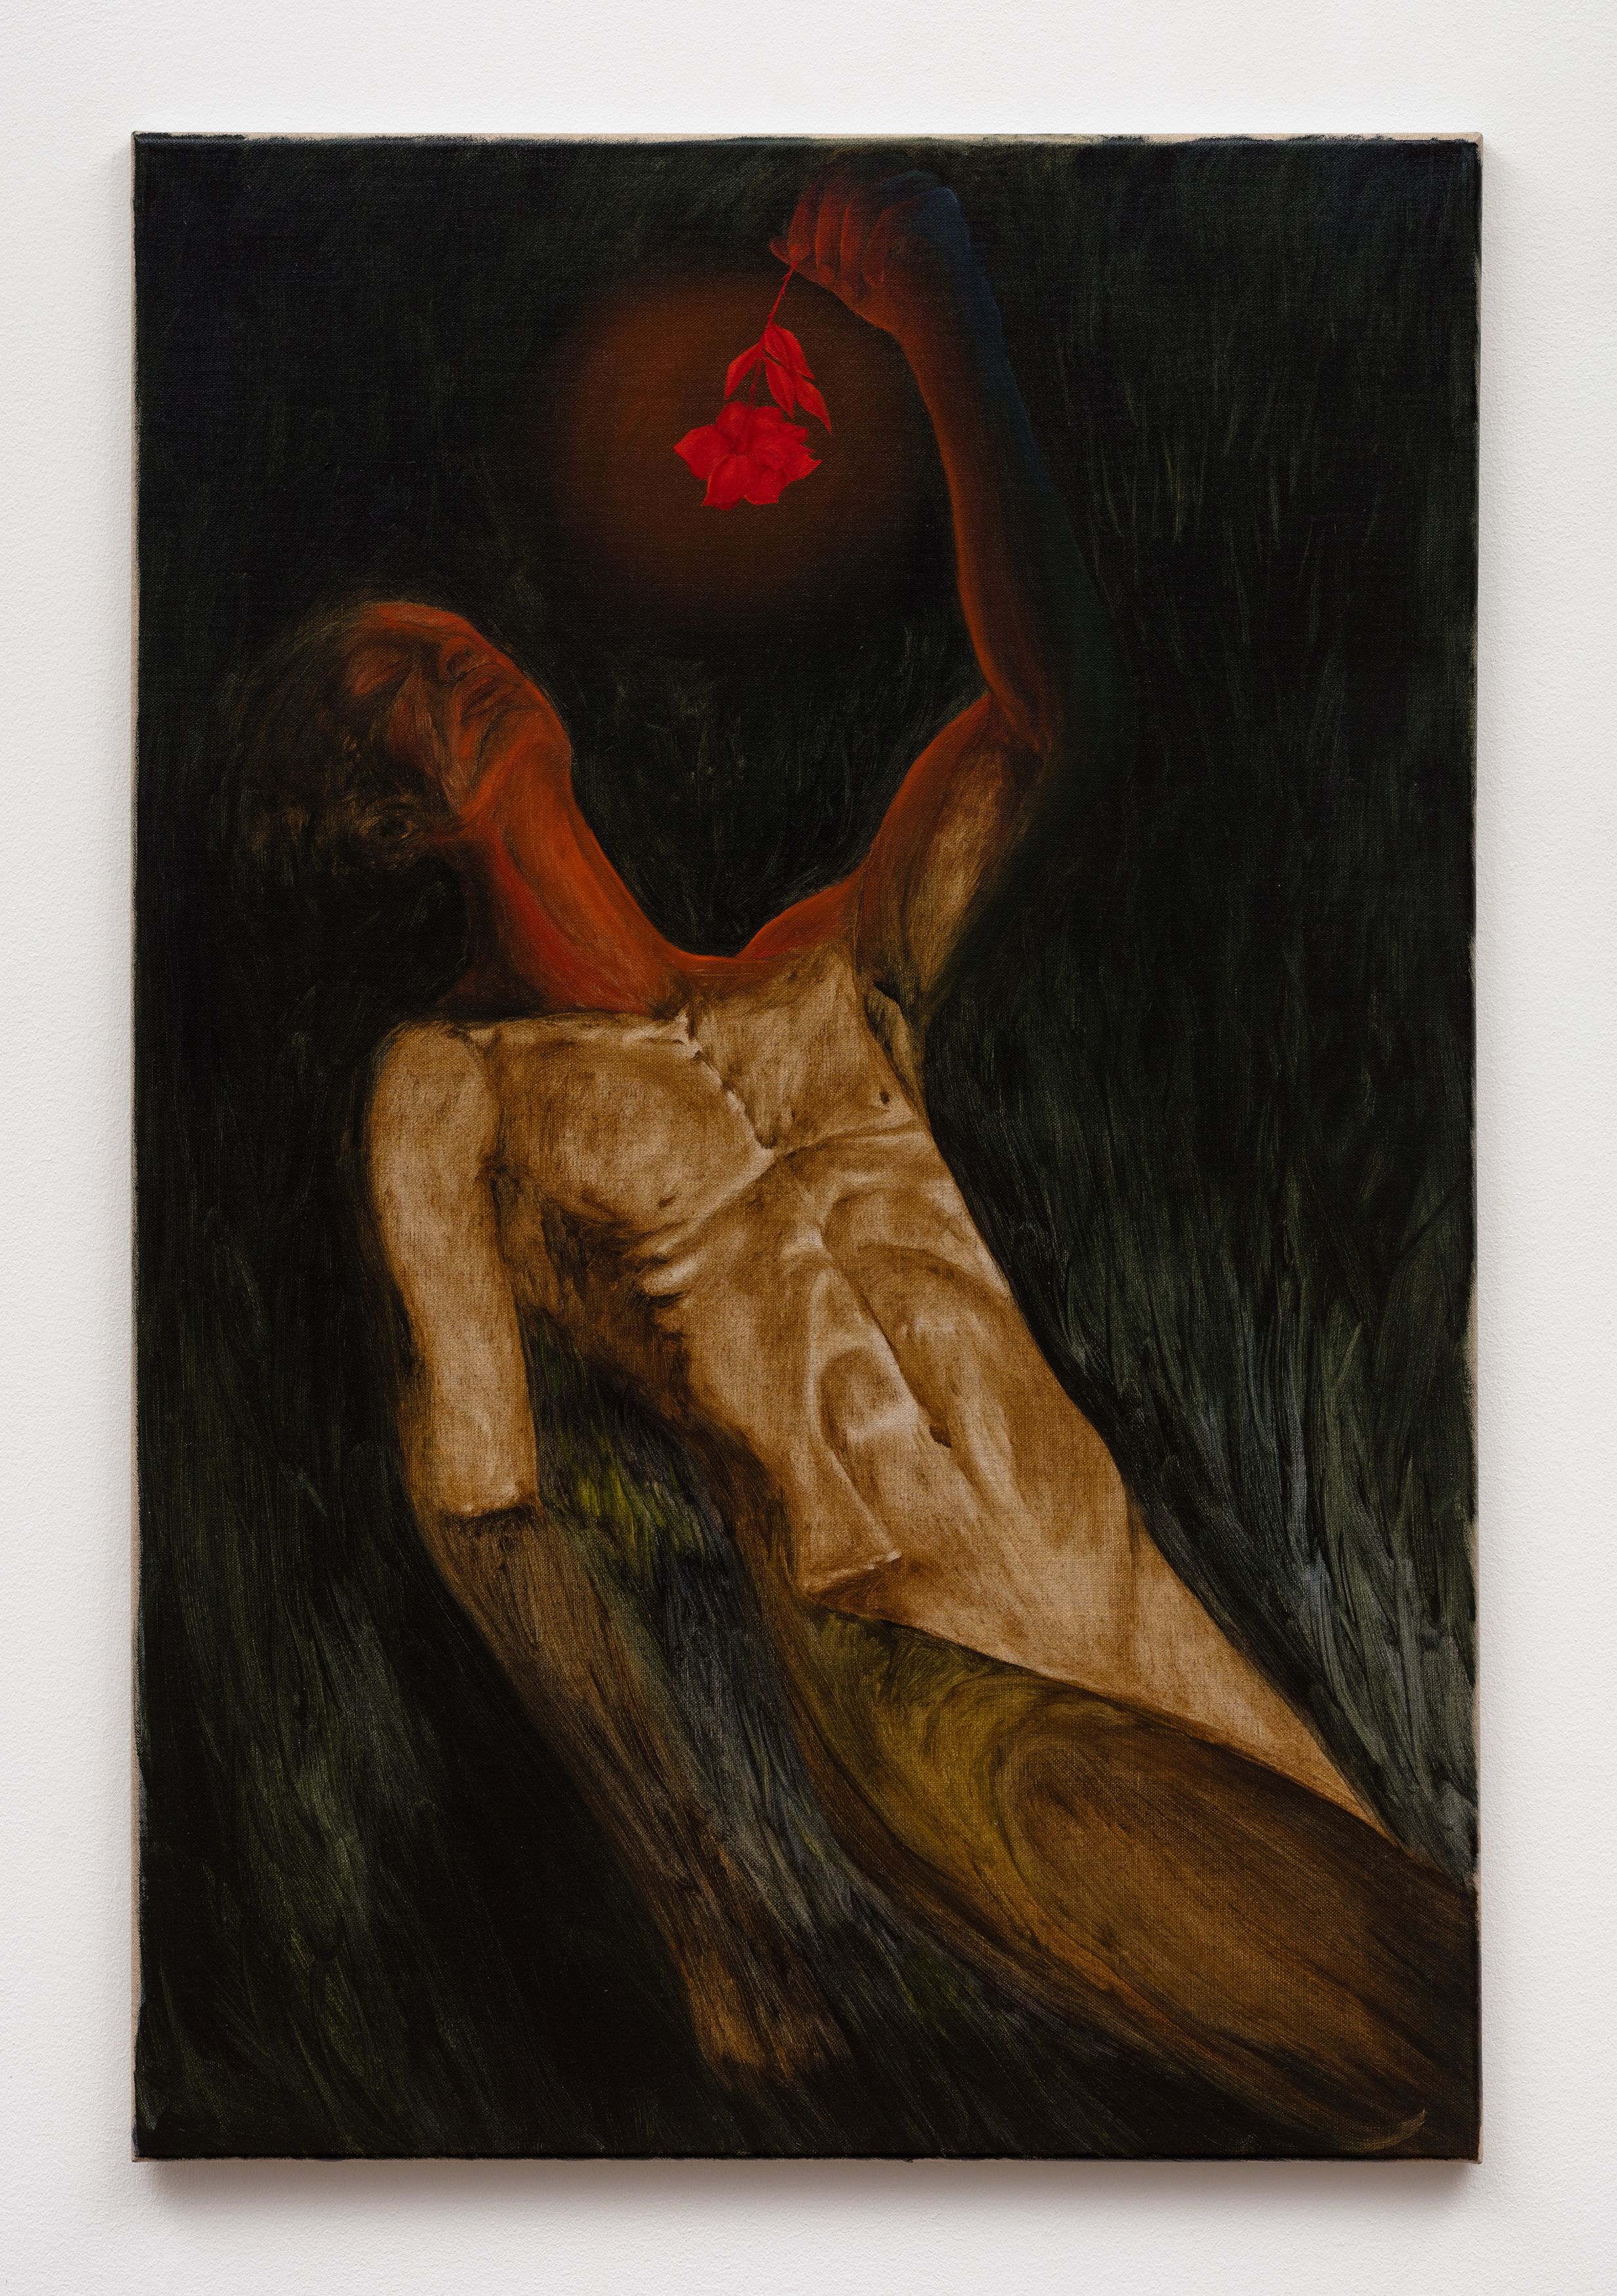 Srijon Chowdhury, Boy with a Rose (after JK), 2020, oil on linen, 36 x 24 in. (91.44 x 60.96 cm) 